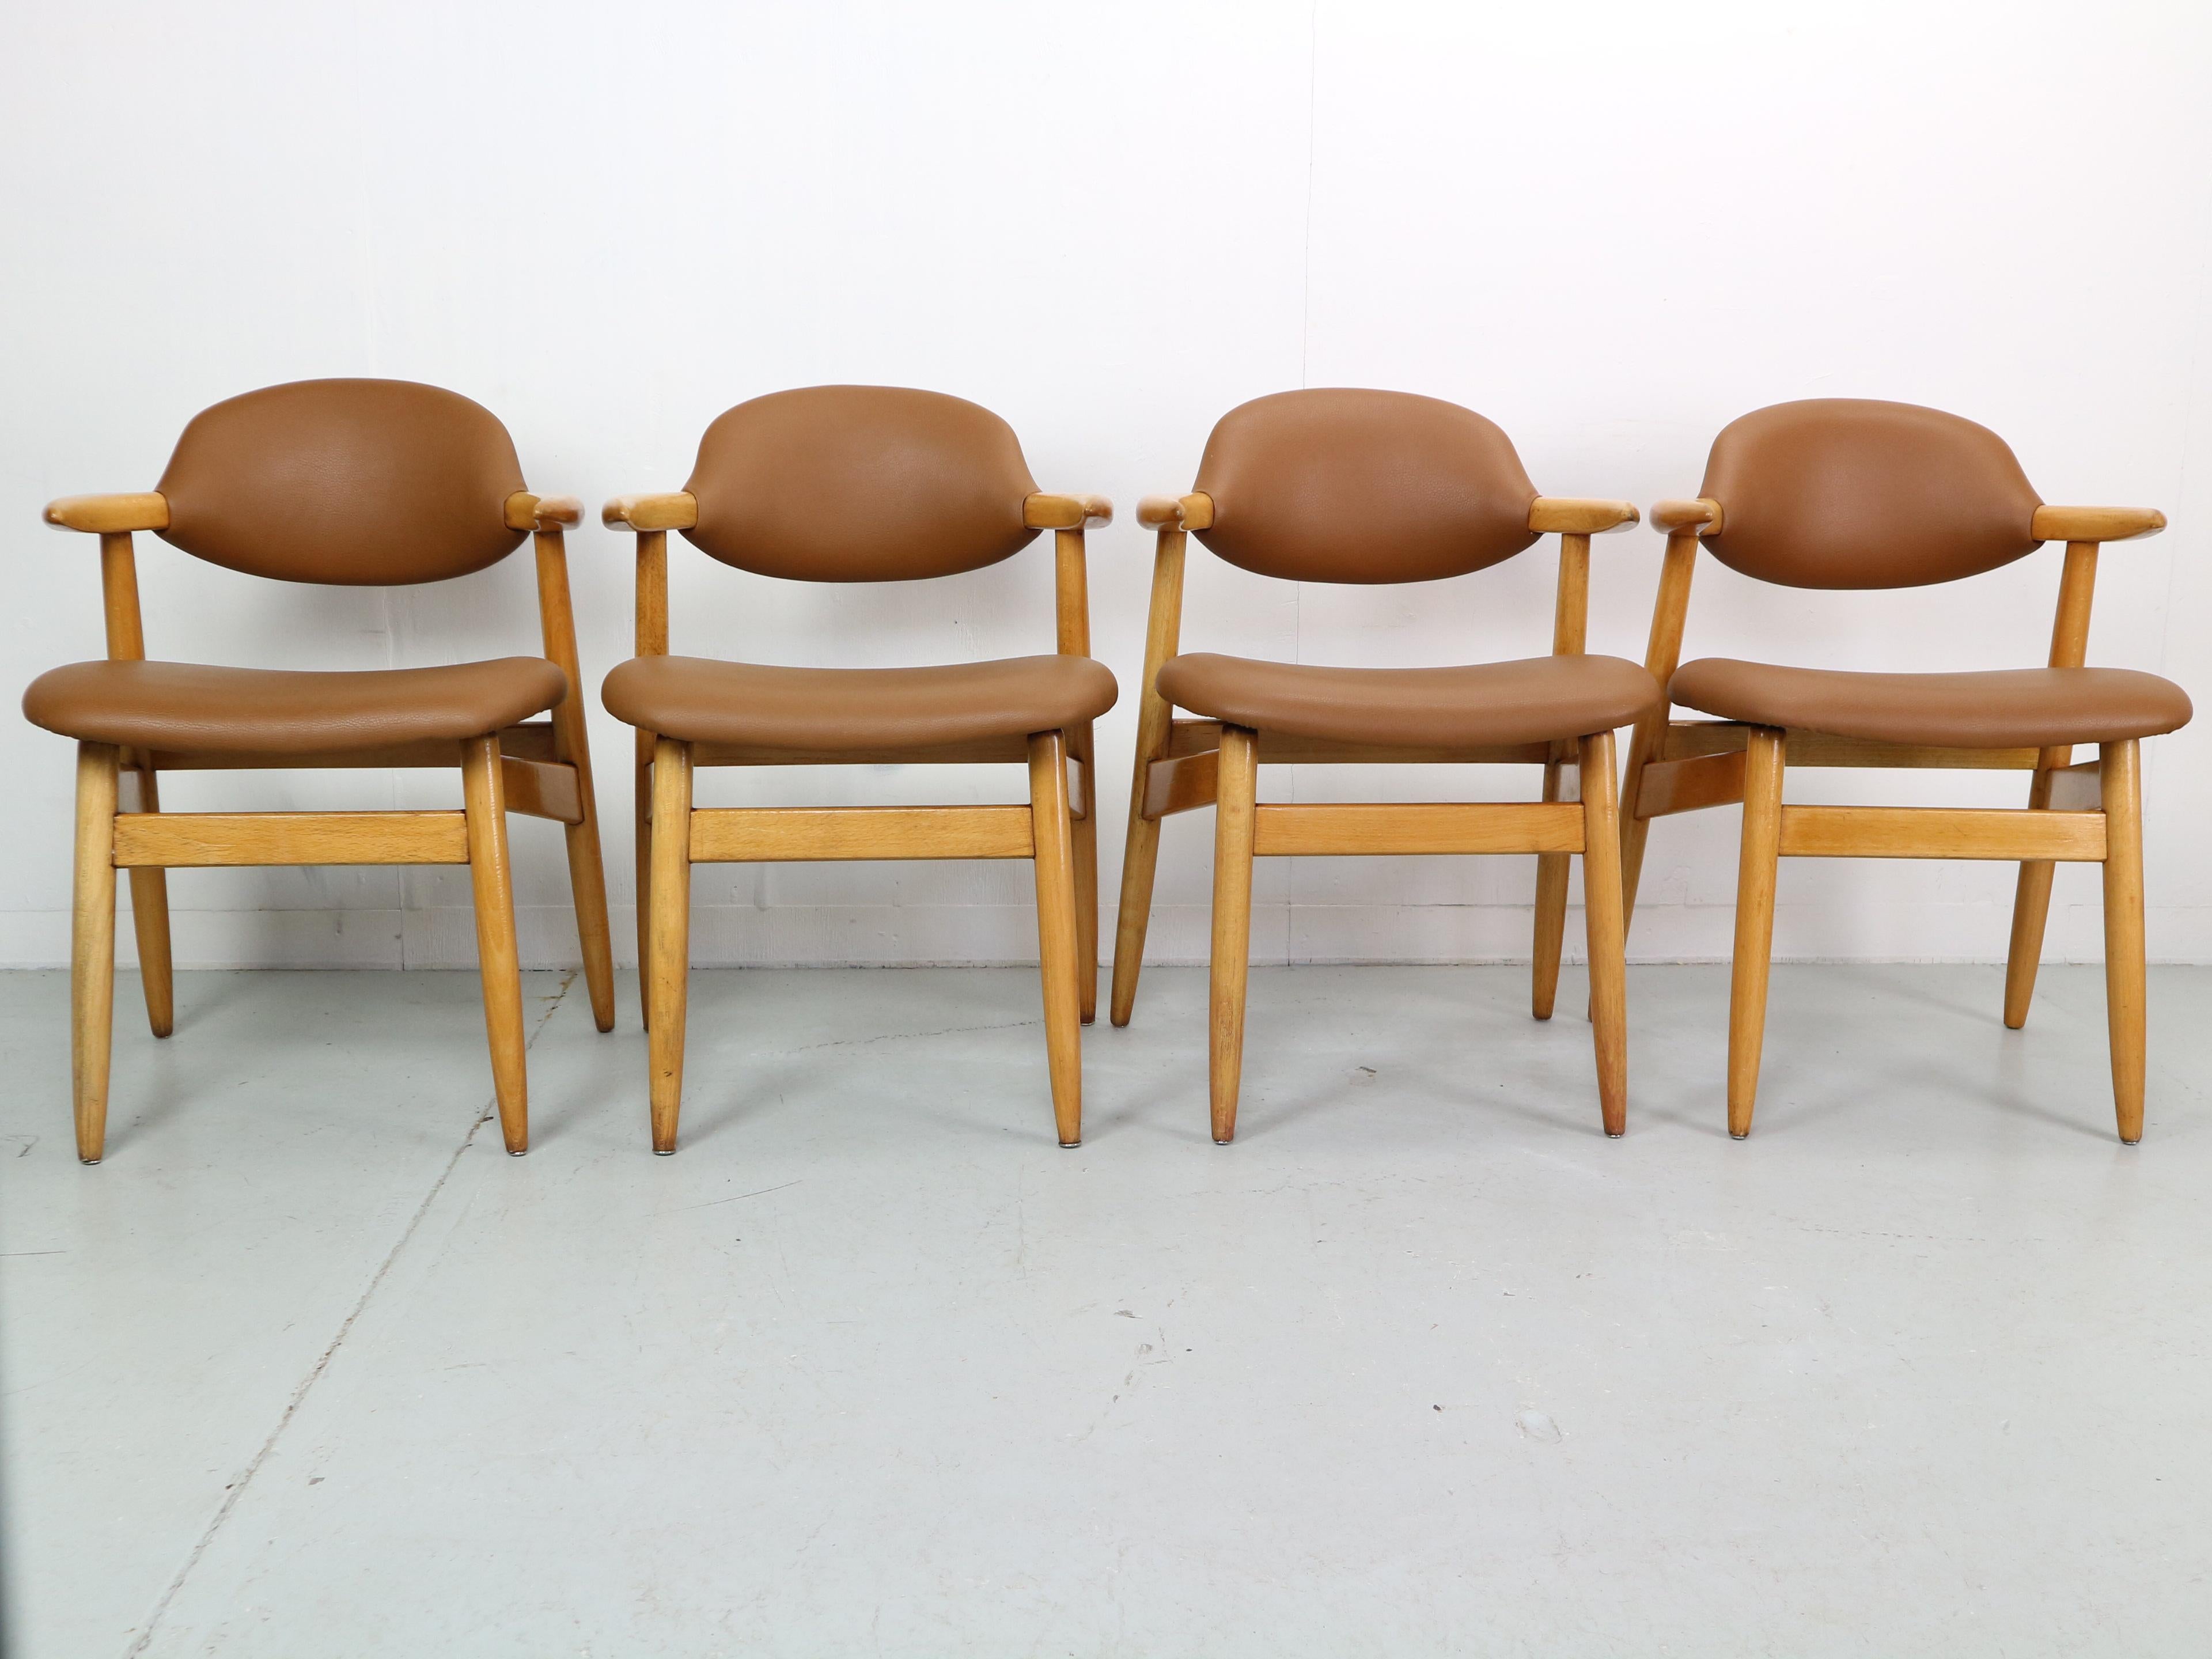 Very nicely shaped cowhorn chair from the Propos series, designed by Tijsseling for Hulmefa, The Netherlands, 1960. The chair is made of solid oak wood and has light brown newl faux leather upholstery. Were the model name comes from is pretty clear,